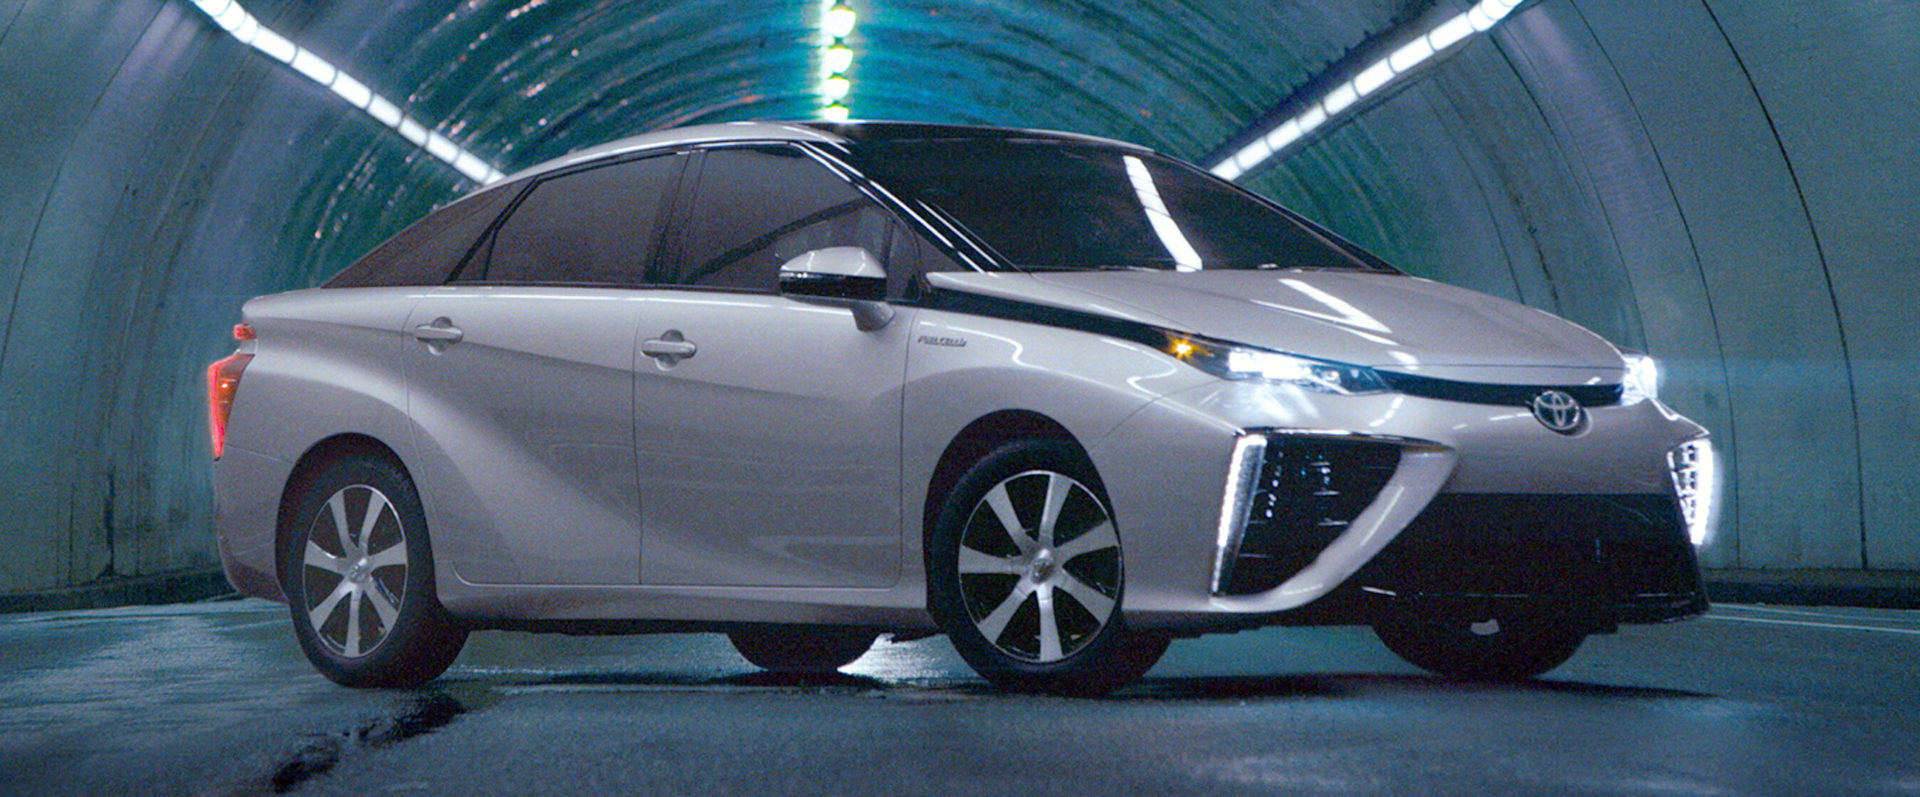 2019 Toyota Mirai Fuel Cell Electric Vehicle